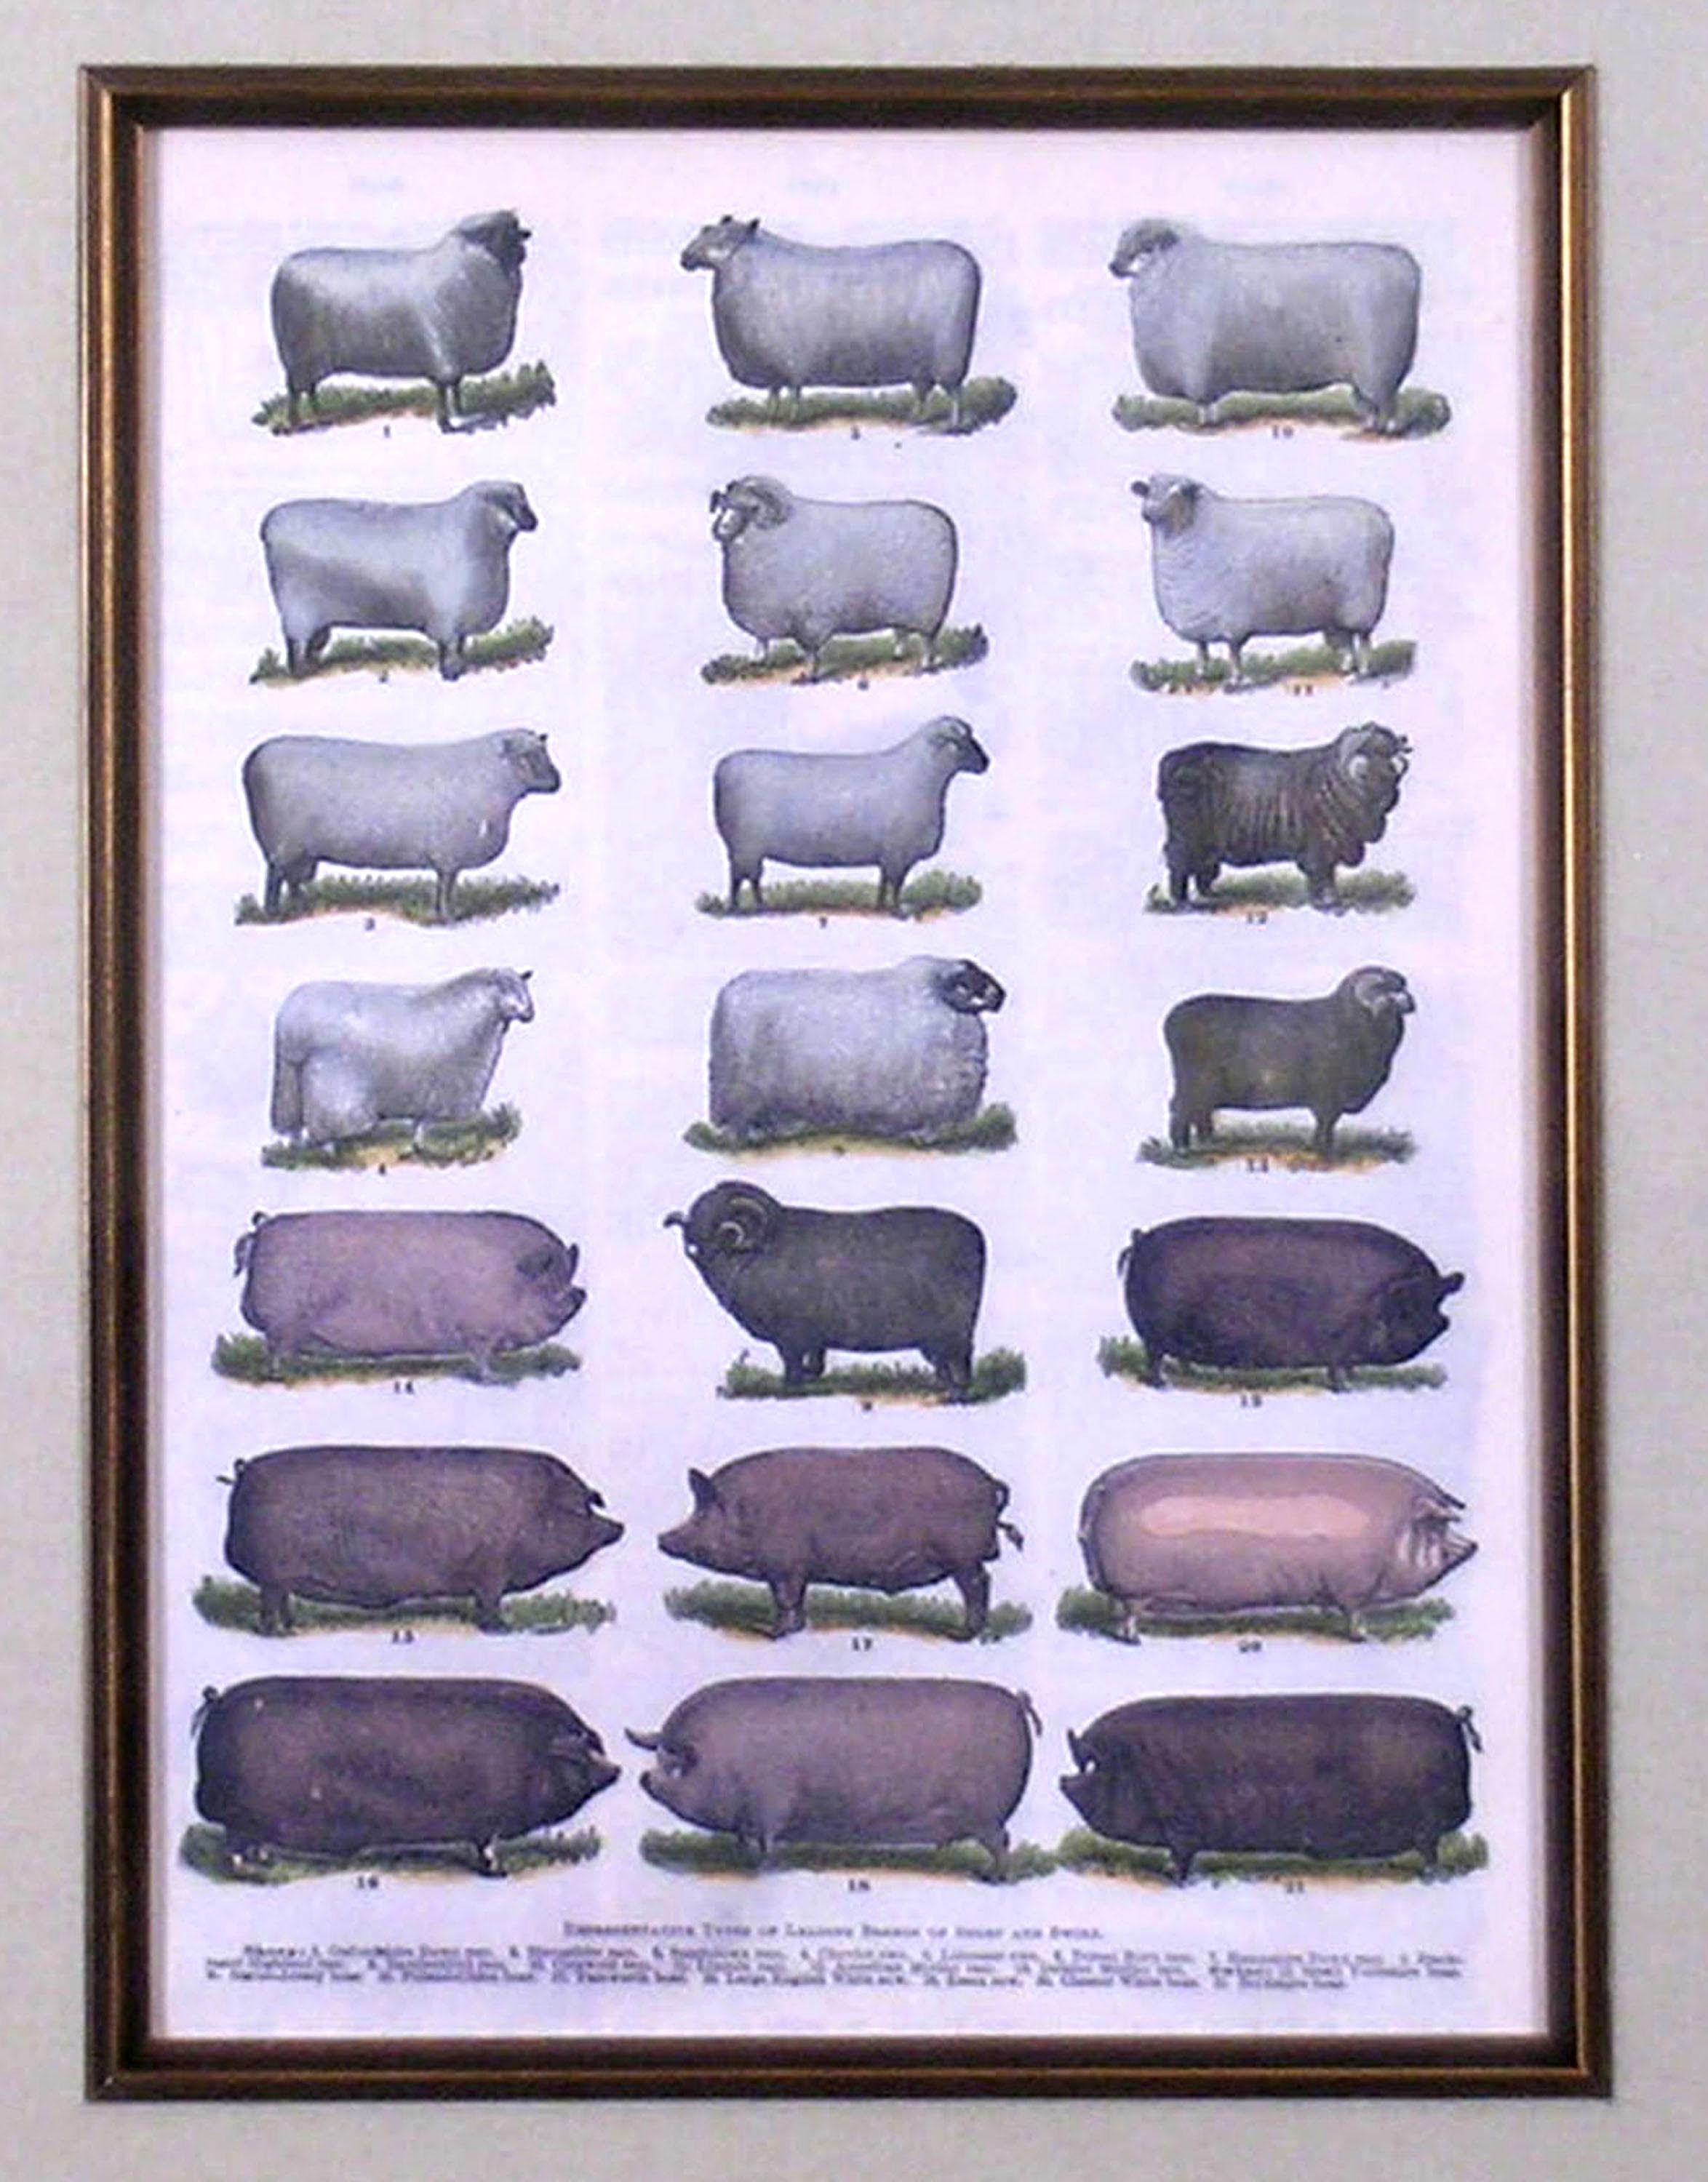 Sheep & Swine (Pigs) - Print by Unknown